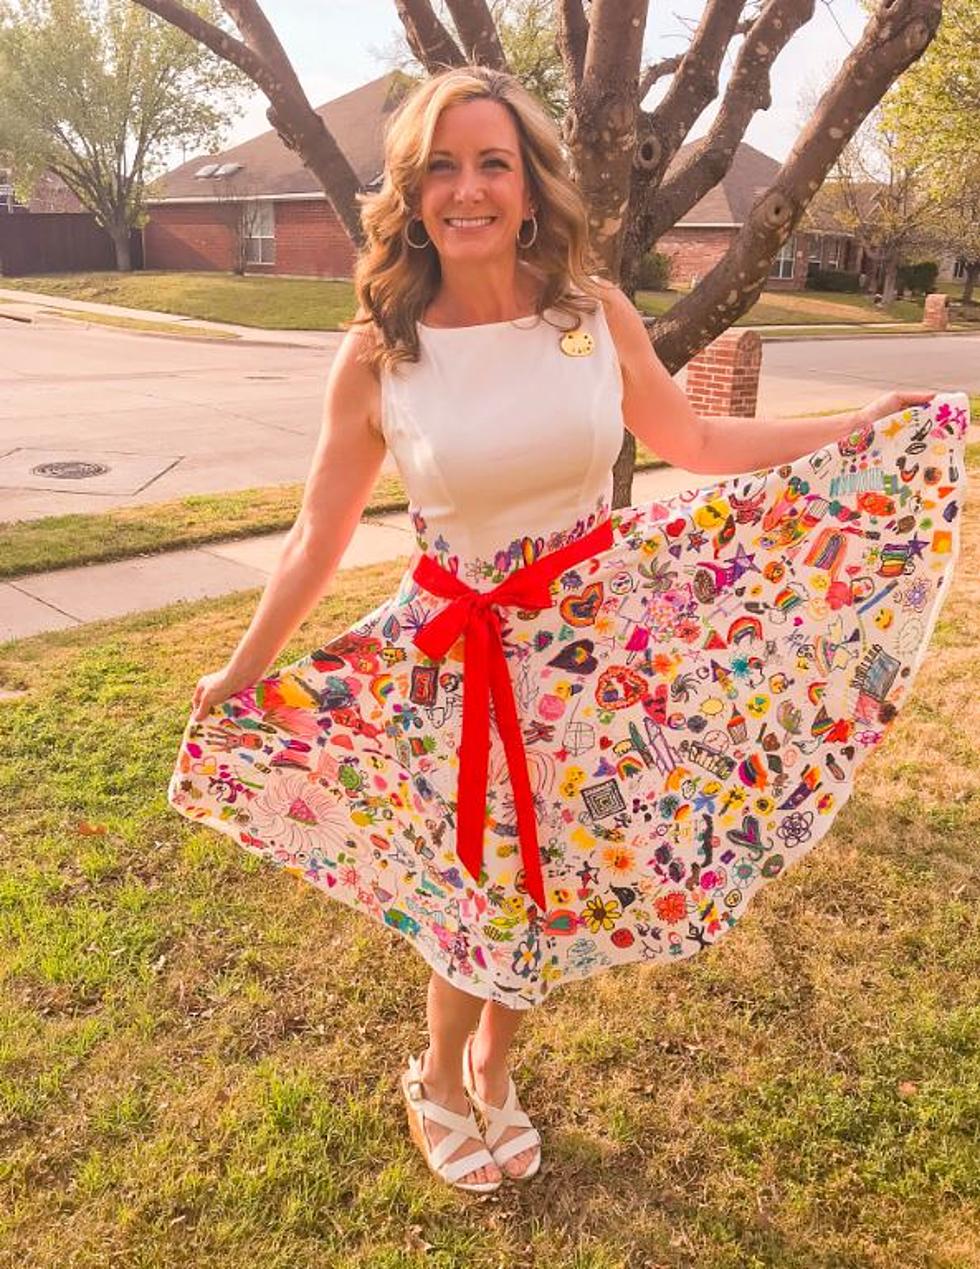 Texas Teacher Let Art Students Draw on Her Dress to Create a Unique Masterpiece